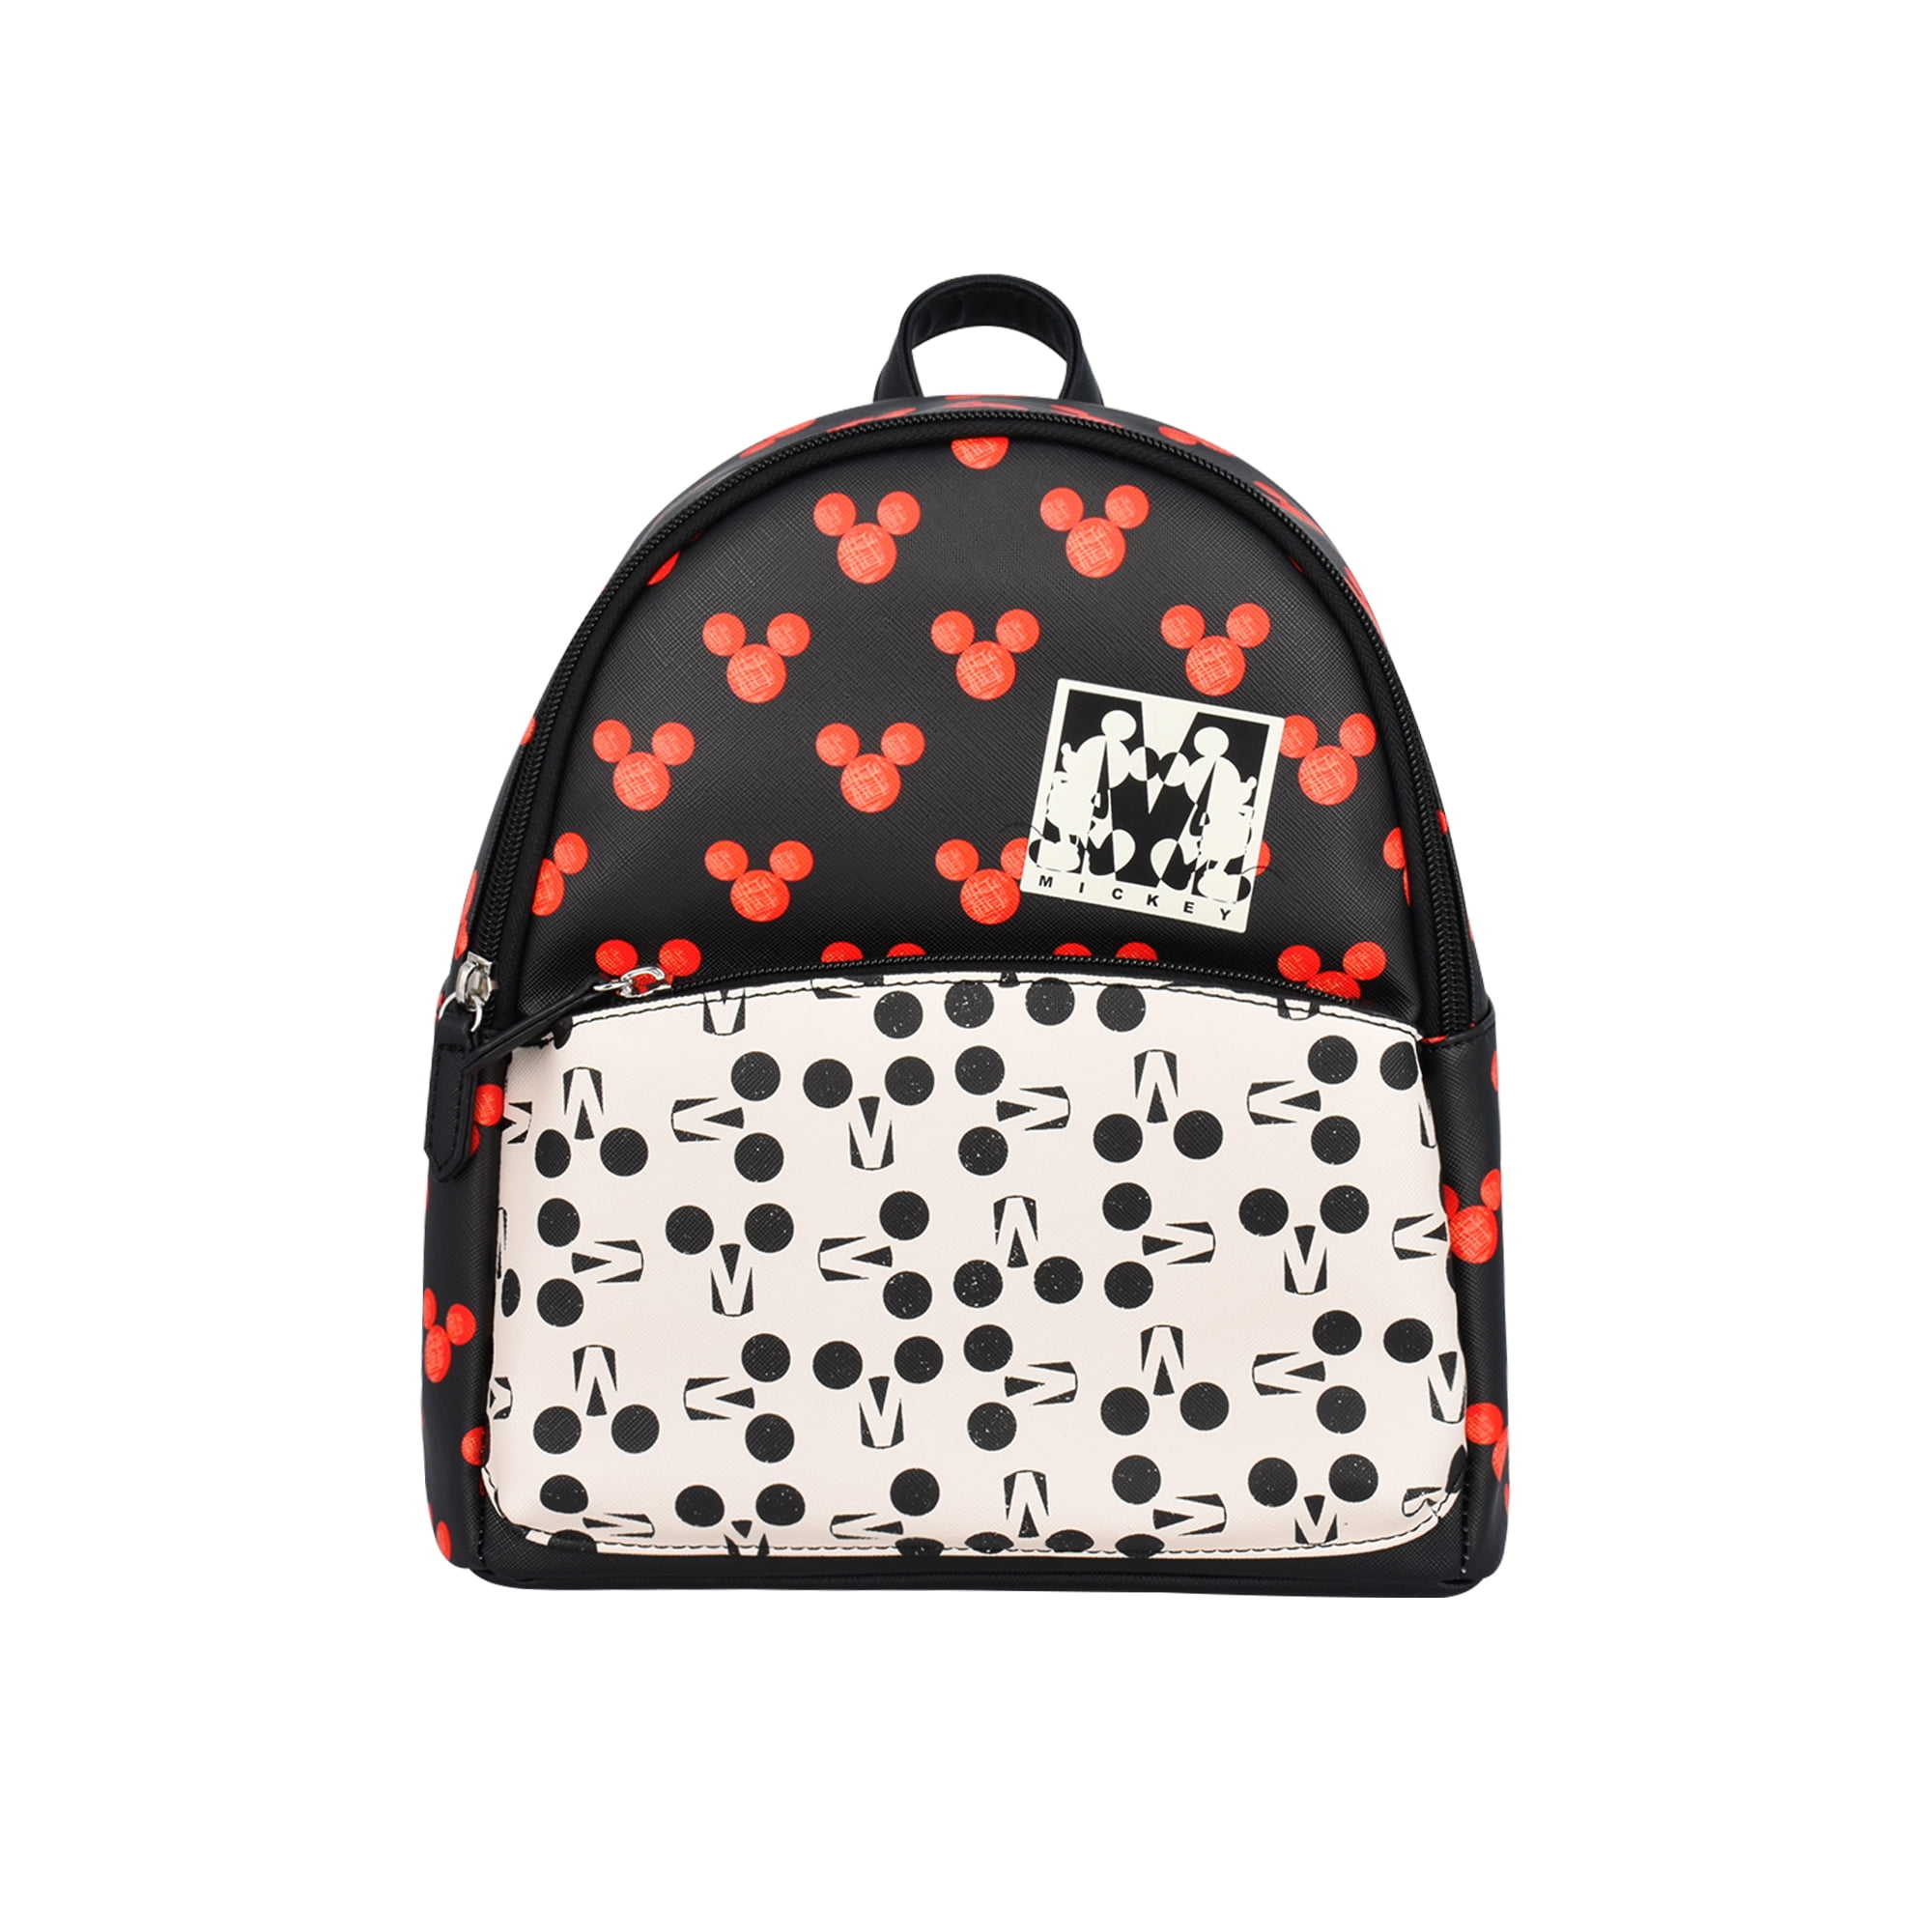 Pattern Circle Texture Decoration Geometric Dot Unique Custom Outdoor Shoulders Bag Fabric Backpack Multipurpose Daypacks For Adult